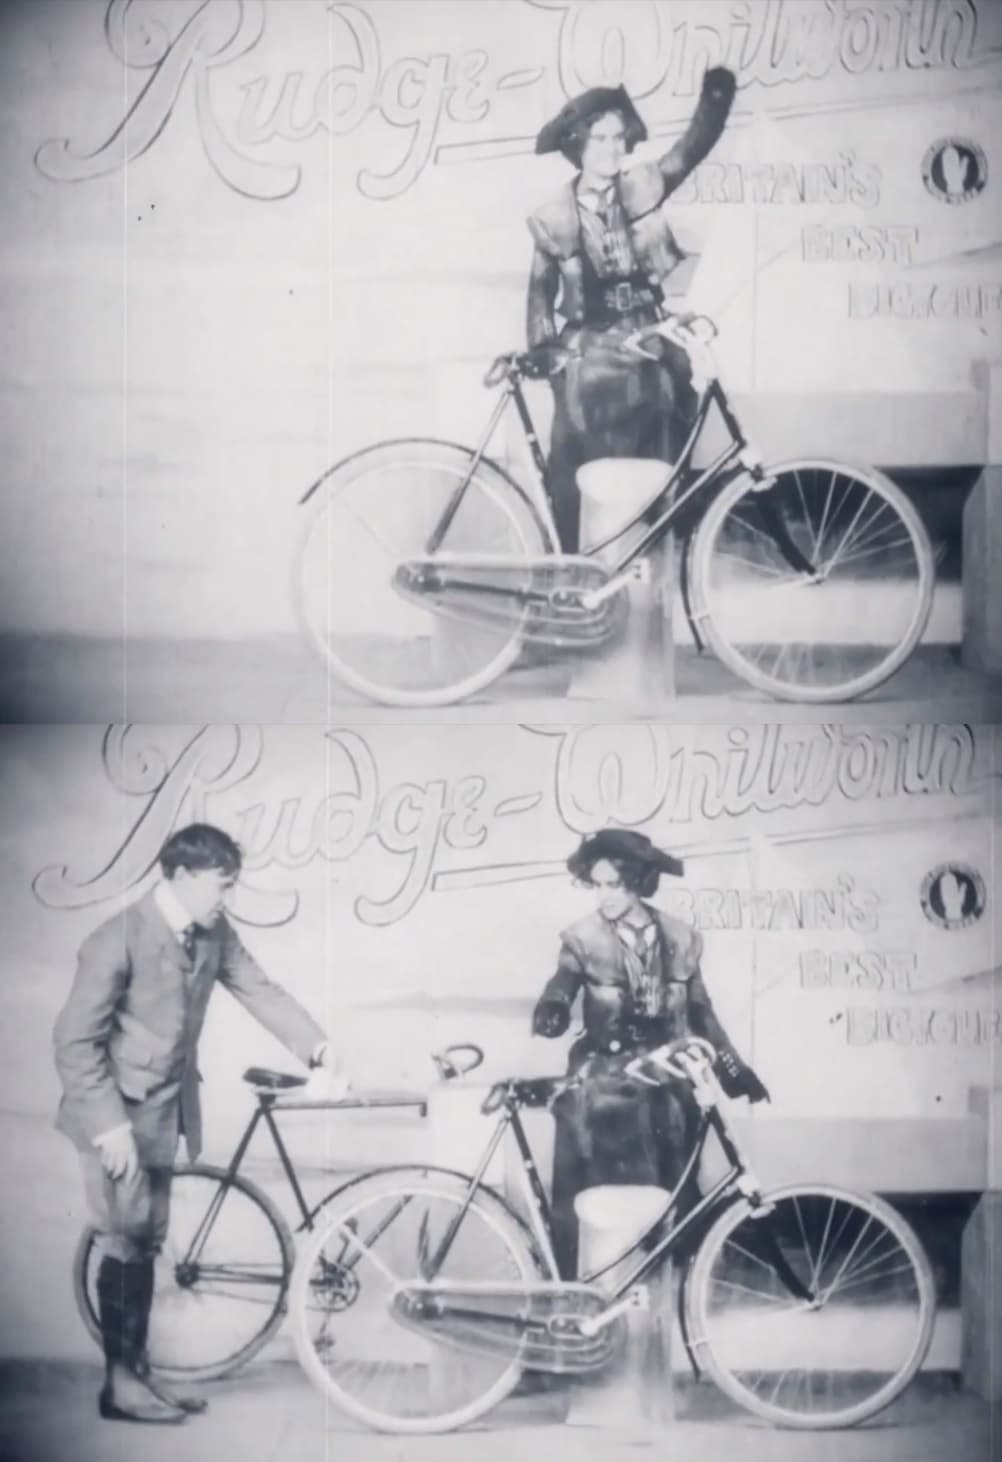 Rudge and Whitworth, Britain's Best Bicycle